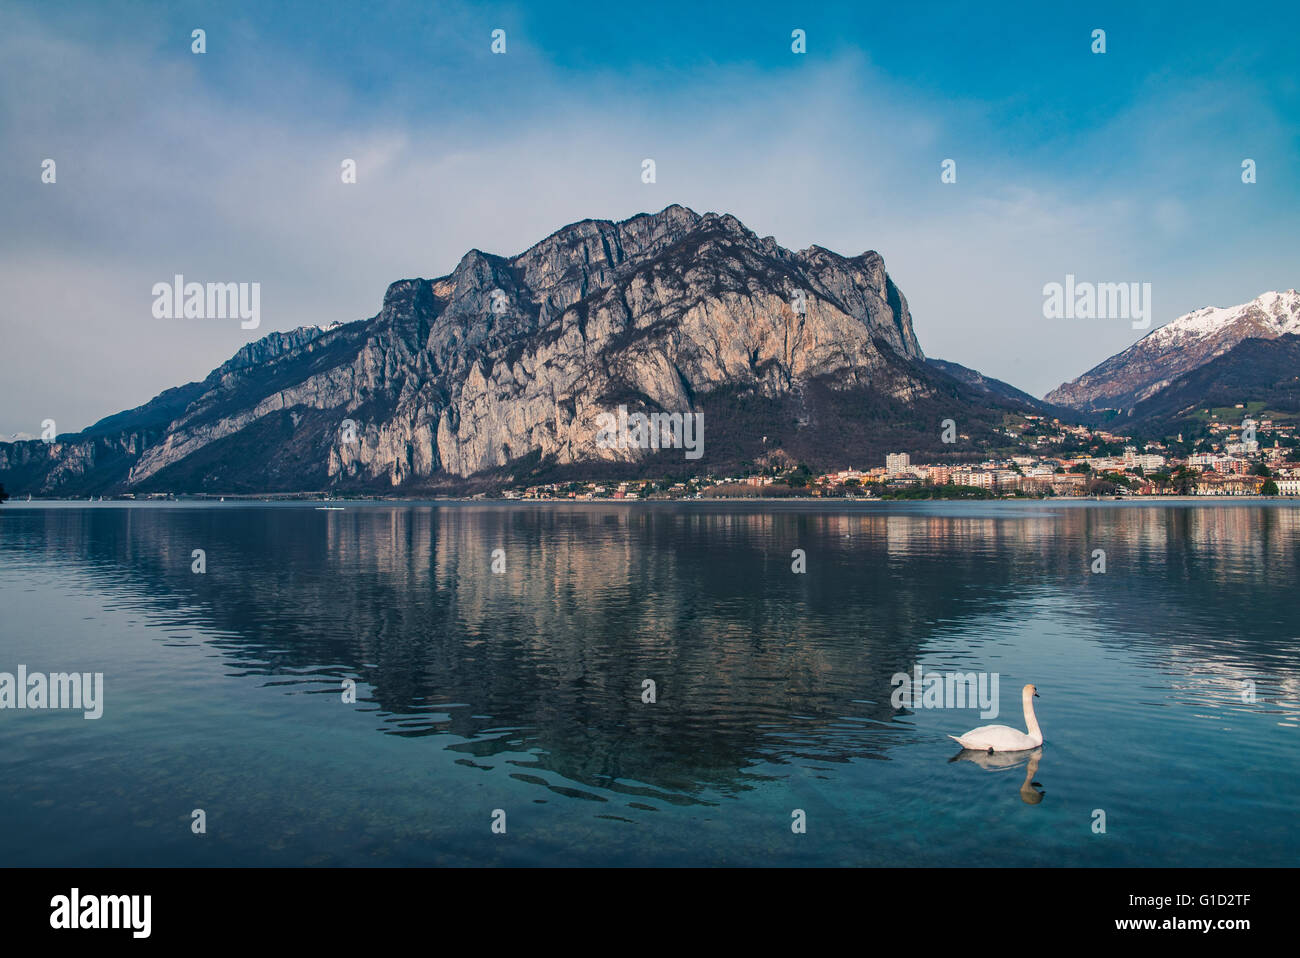 Lecco city on the lake in a beautiful sunny day Stock Photo